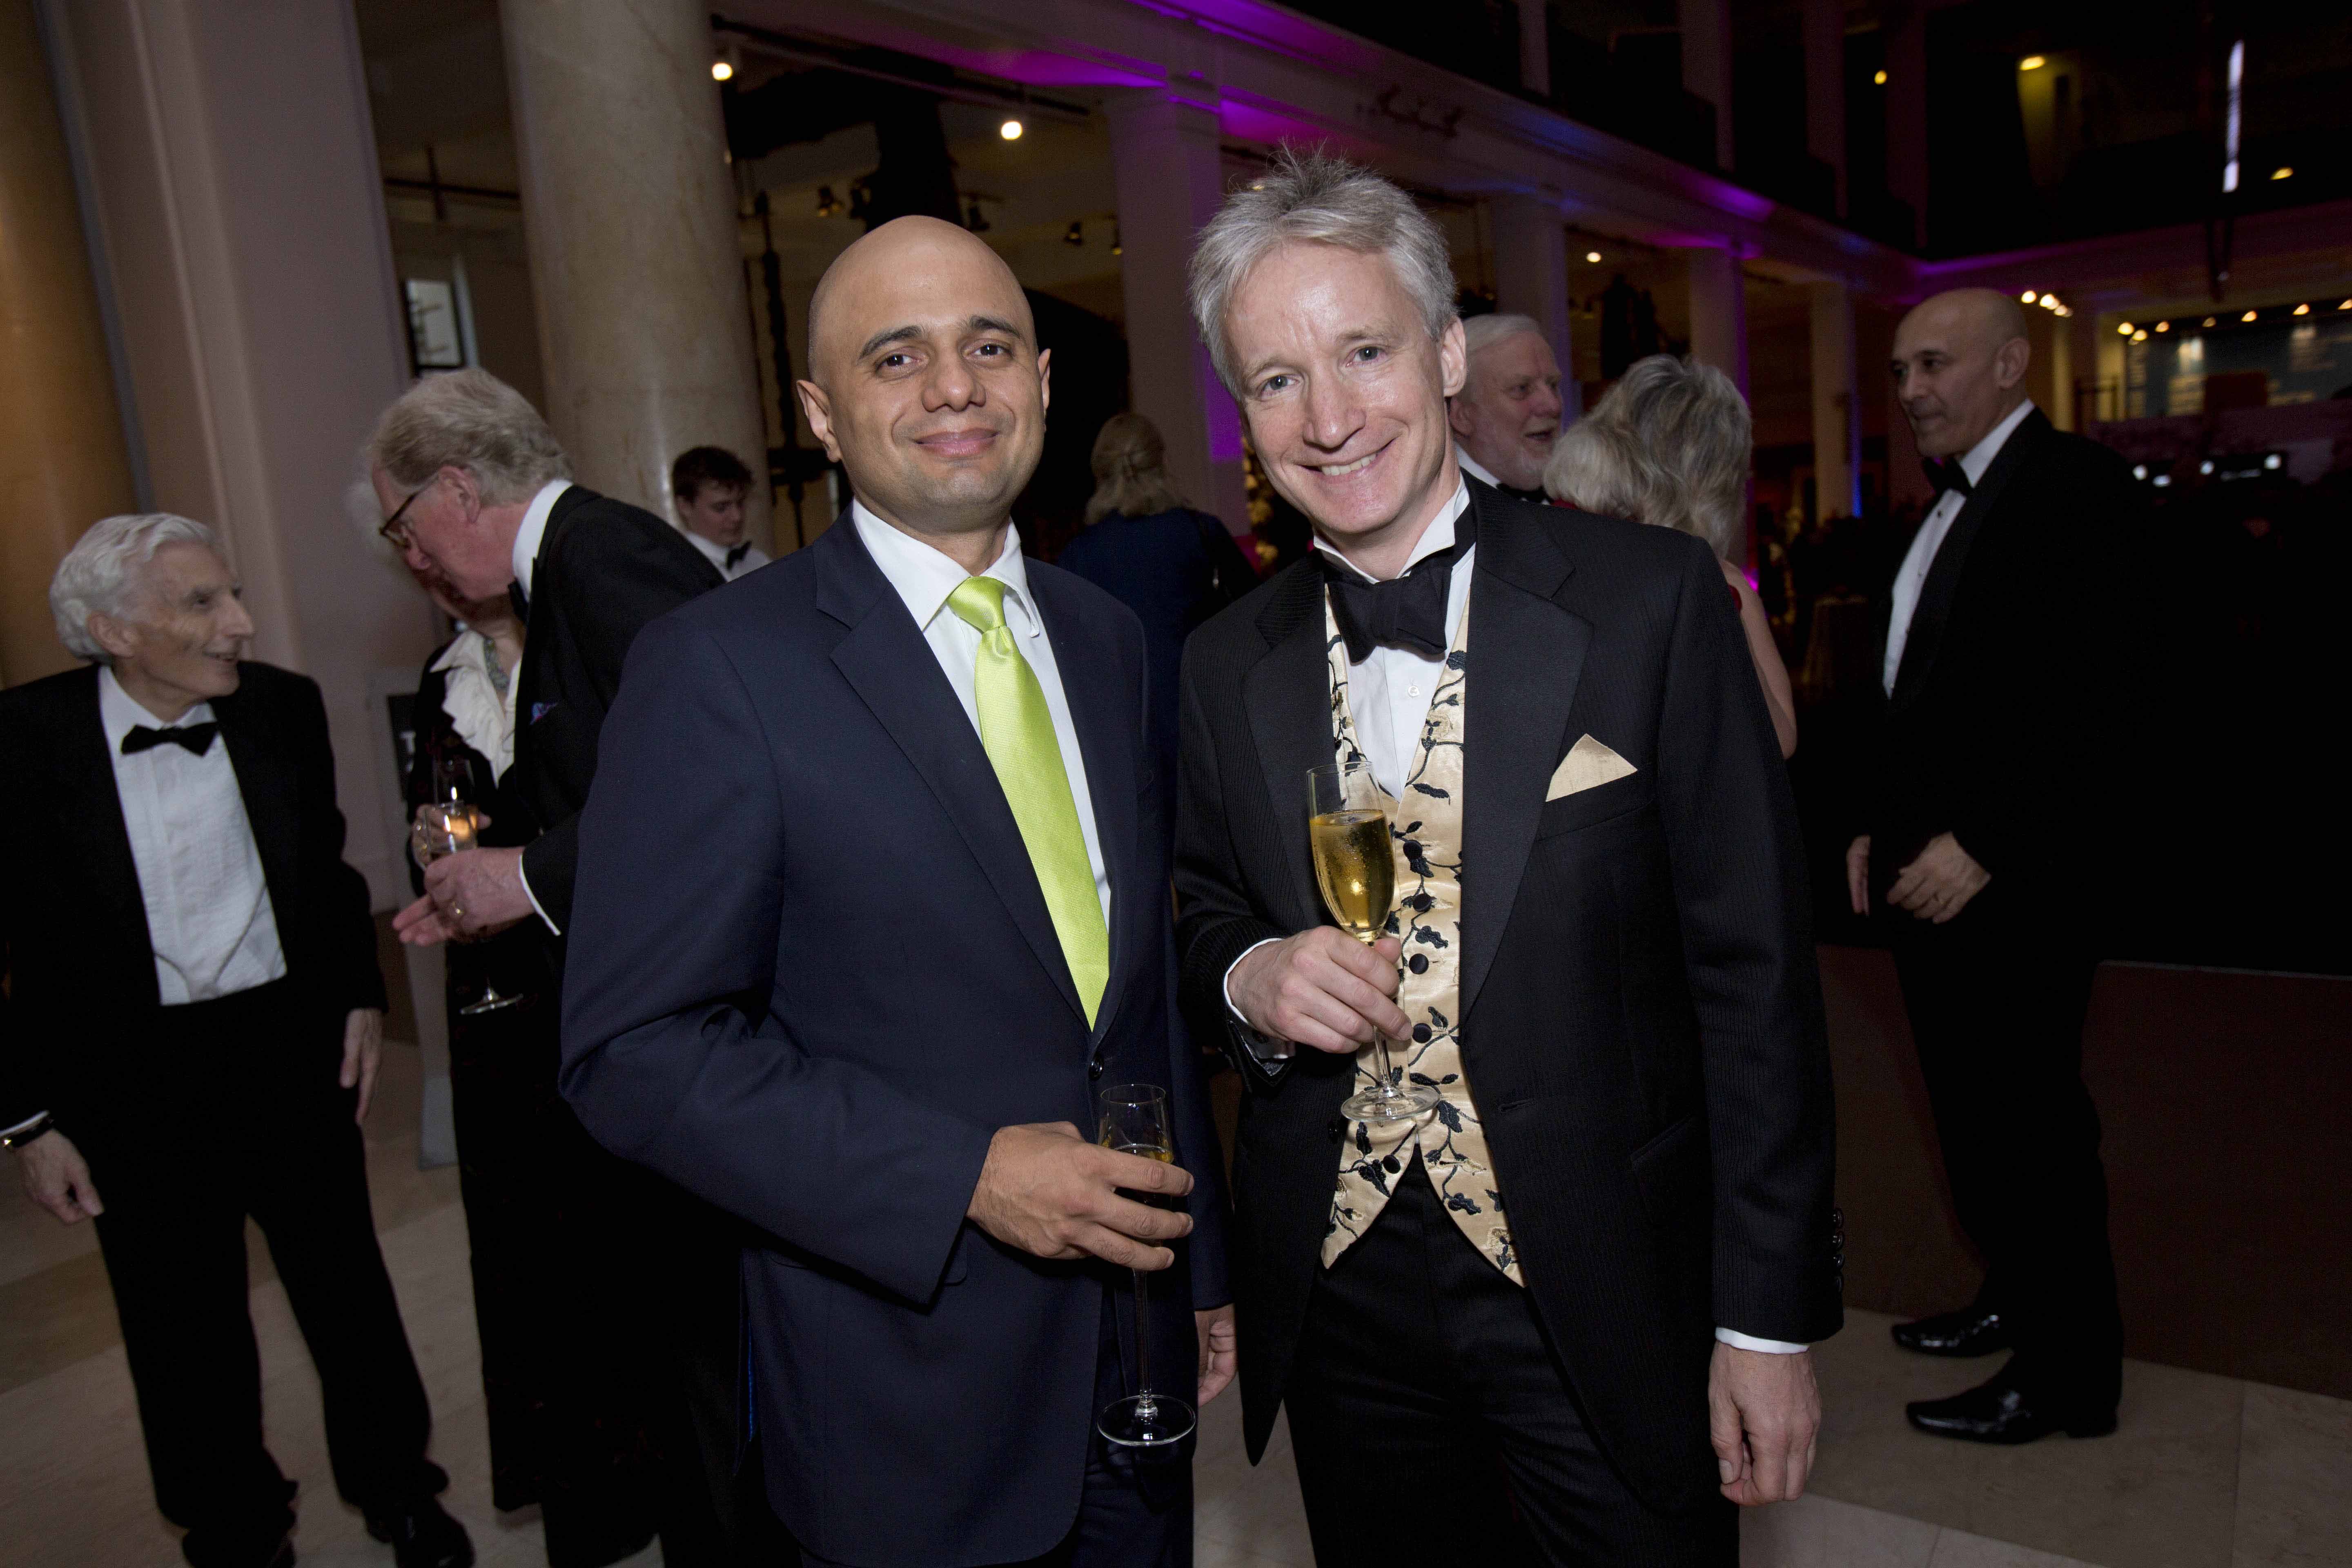 The Right Hon Sajid Javid MP and Dr Douglas Gurr attend the 2014 Science Museum Director's Annual Dinner © Tim Anderson 